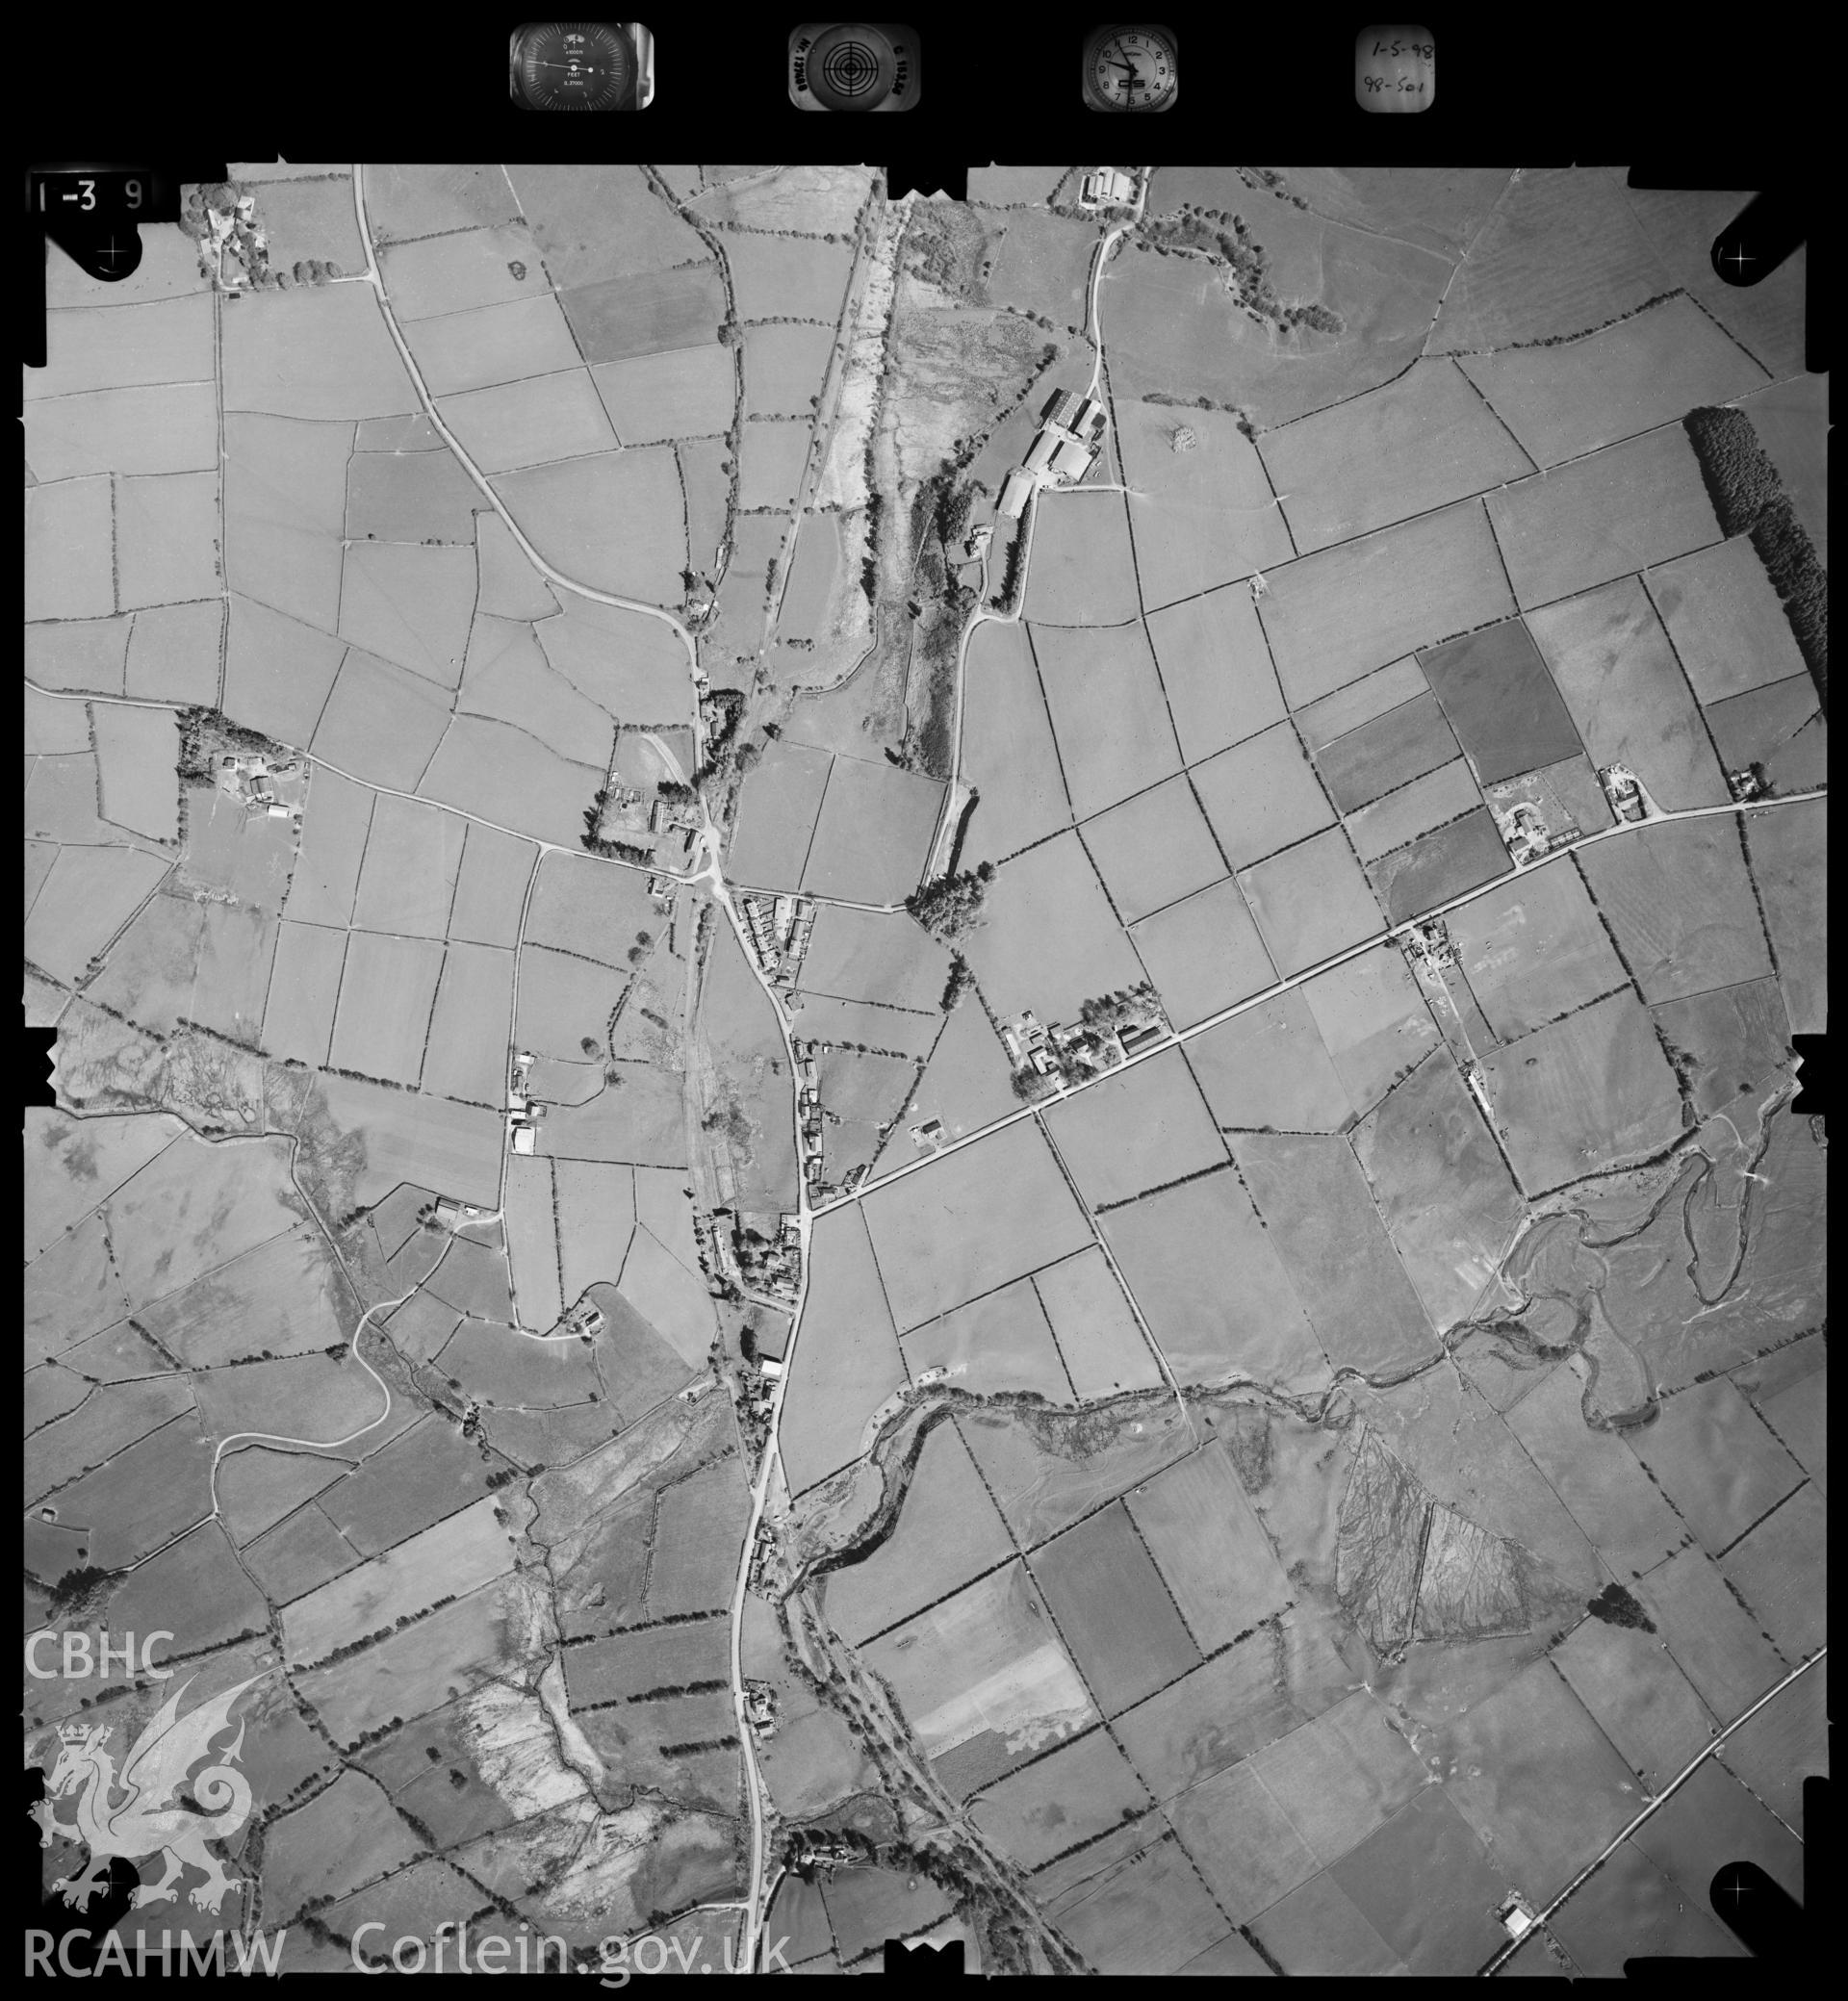 Digitized copy of an aerial photograph showing the Pant y Dwr area, taken by Ordnance Survey, 1998.